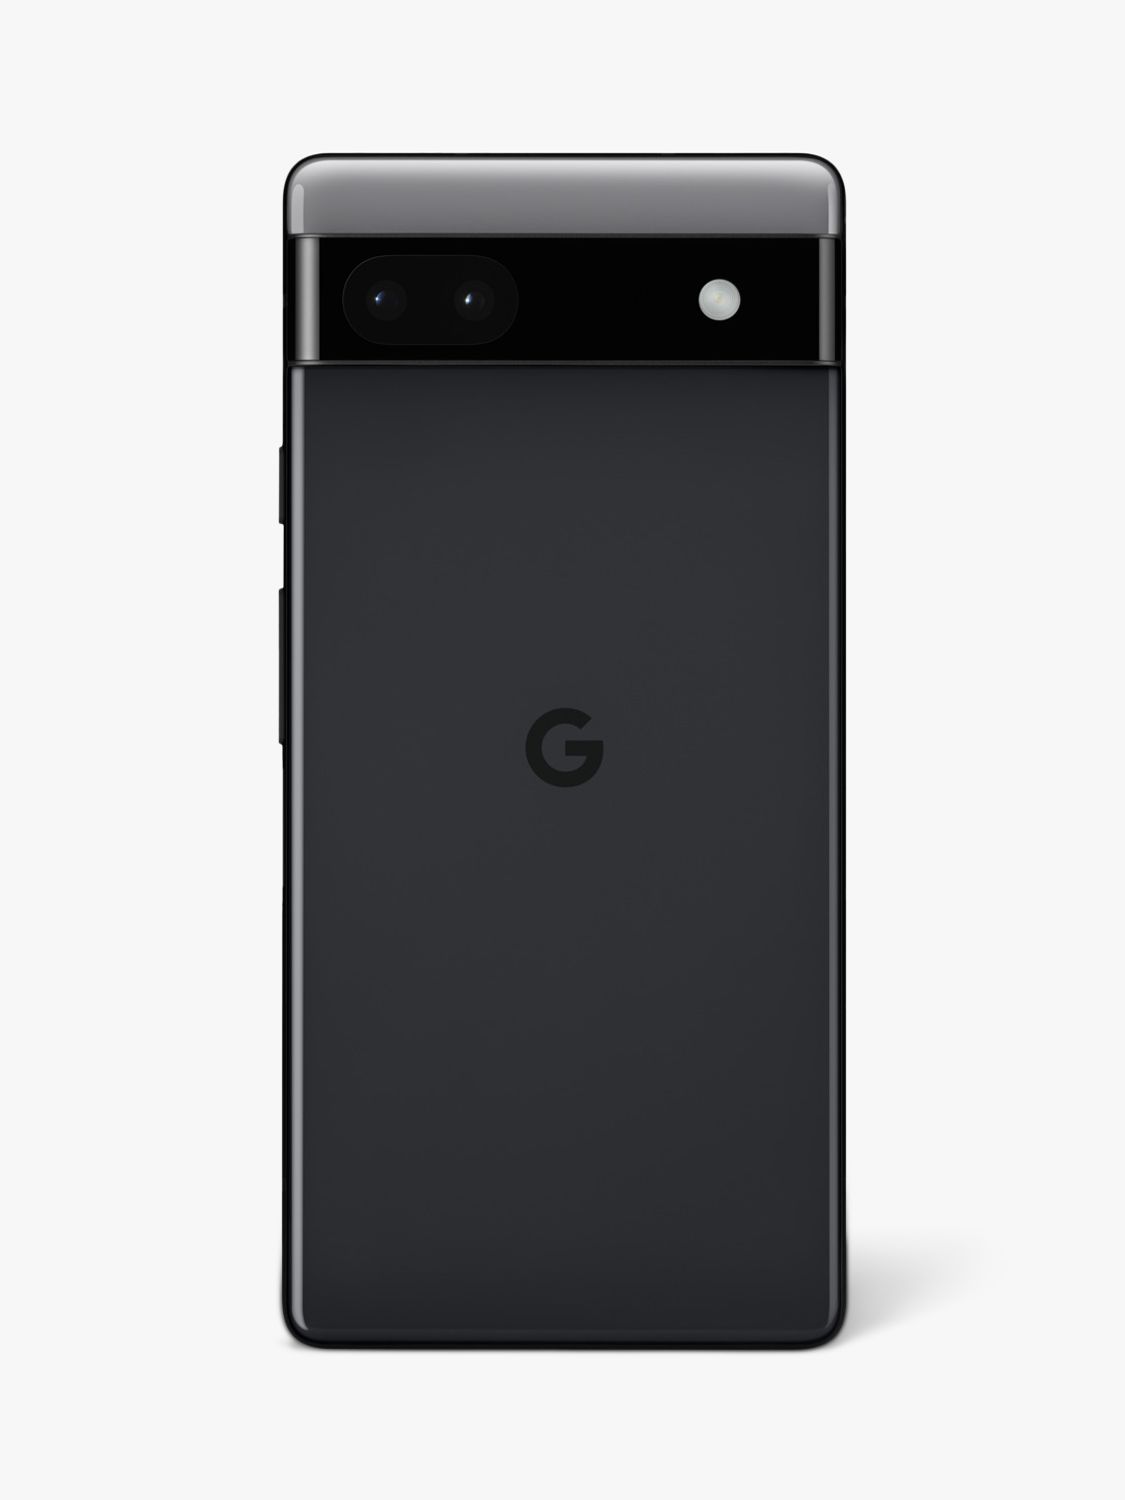 Google Pixel 6a Smartphone, Android, 6.1”, 5G, SIM Free, 128GB, Charcoal